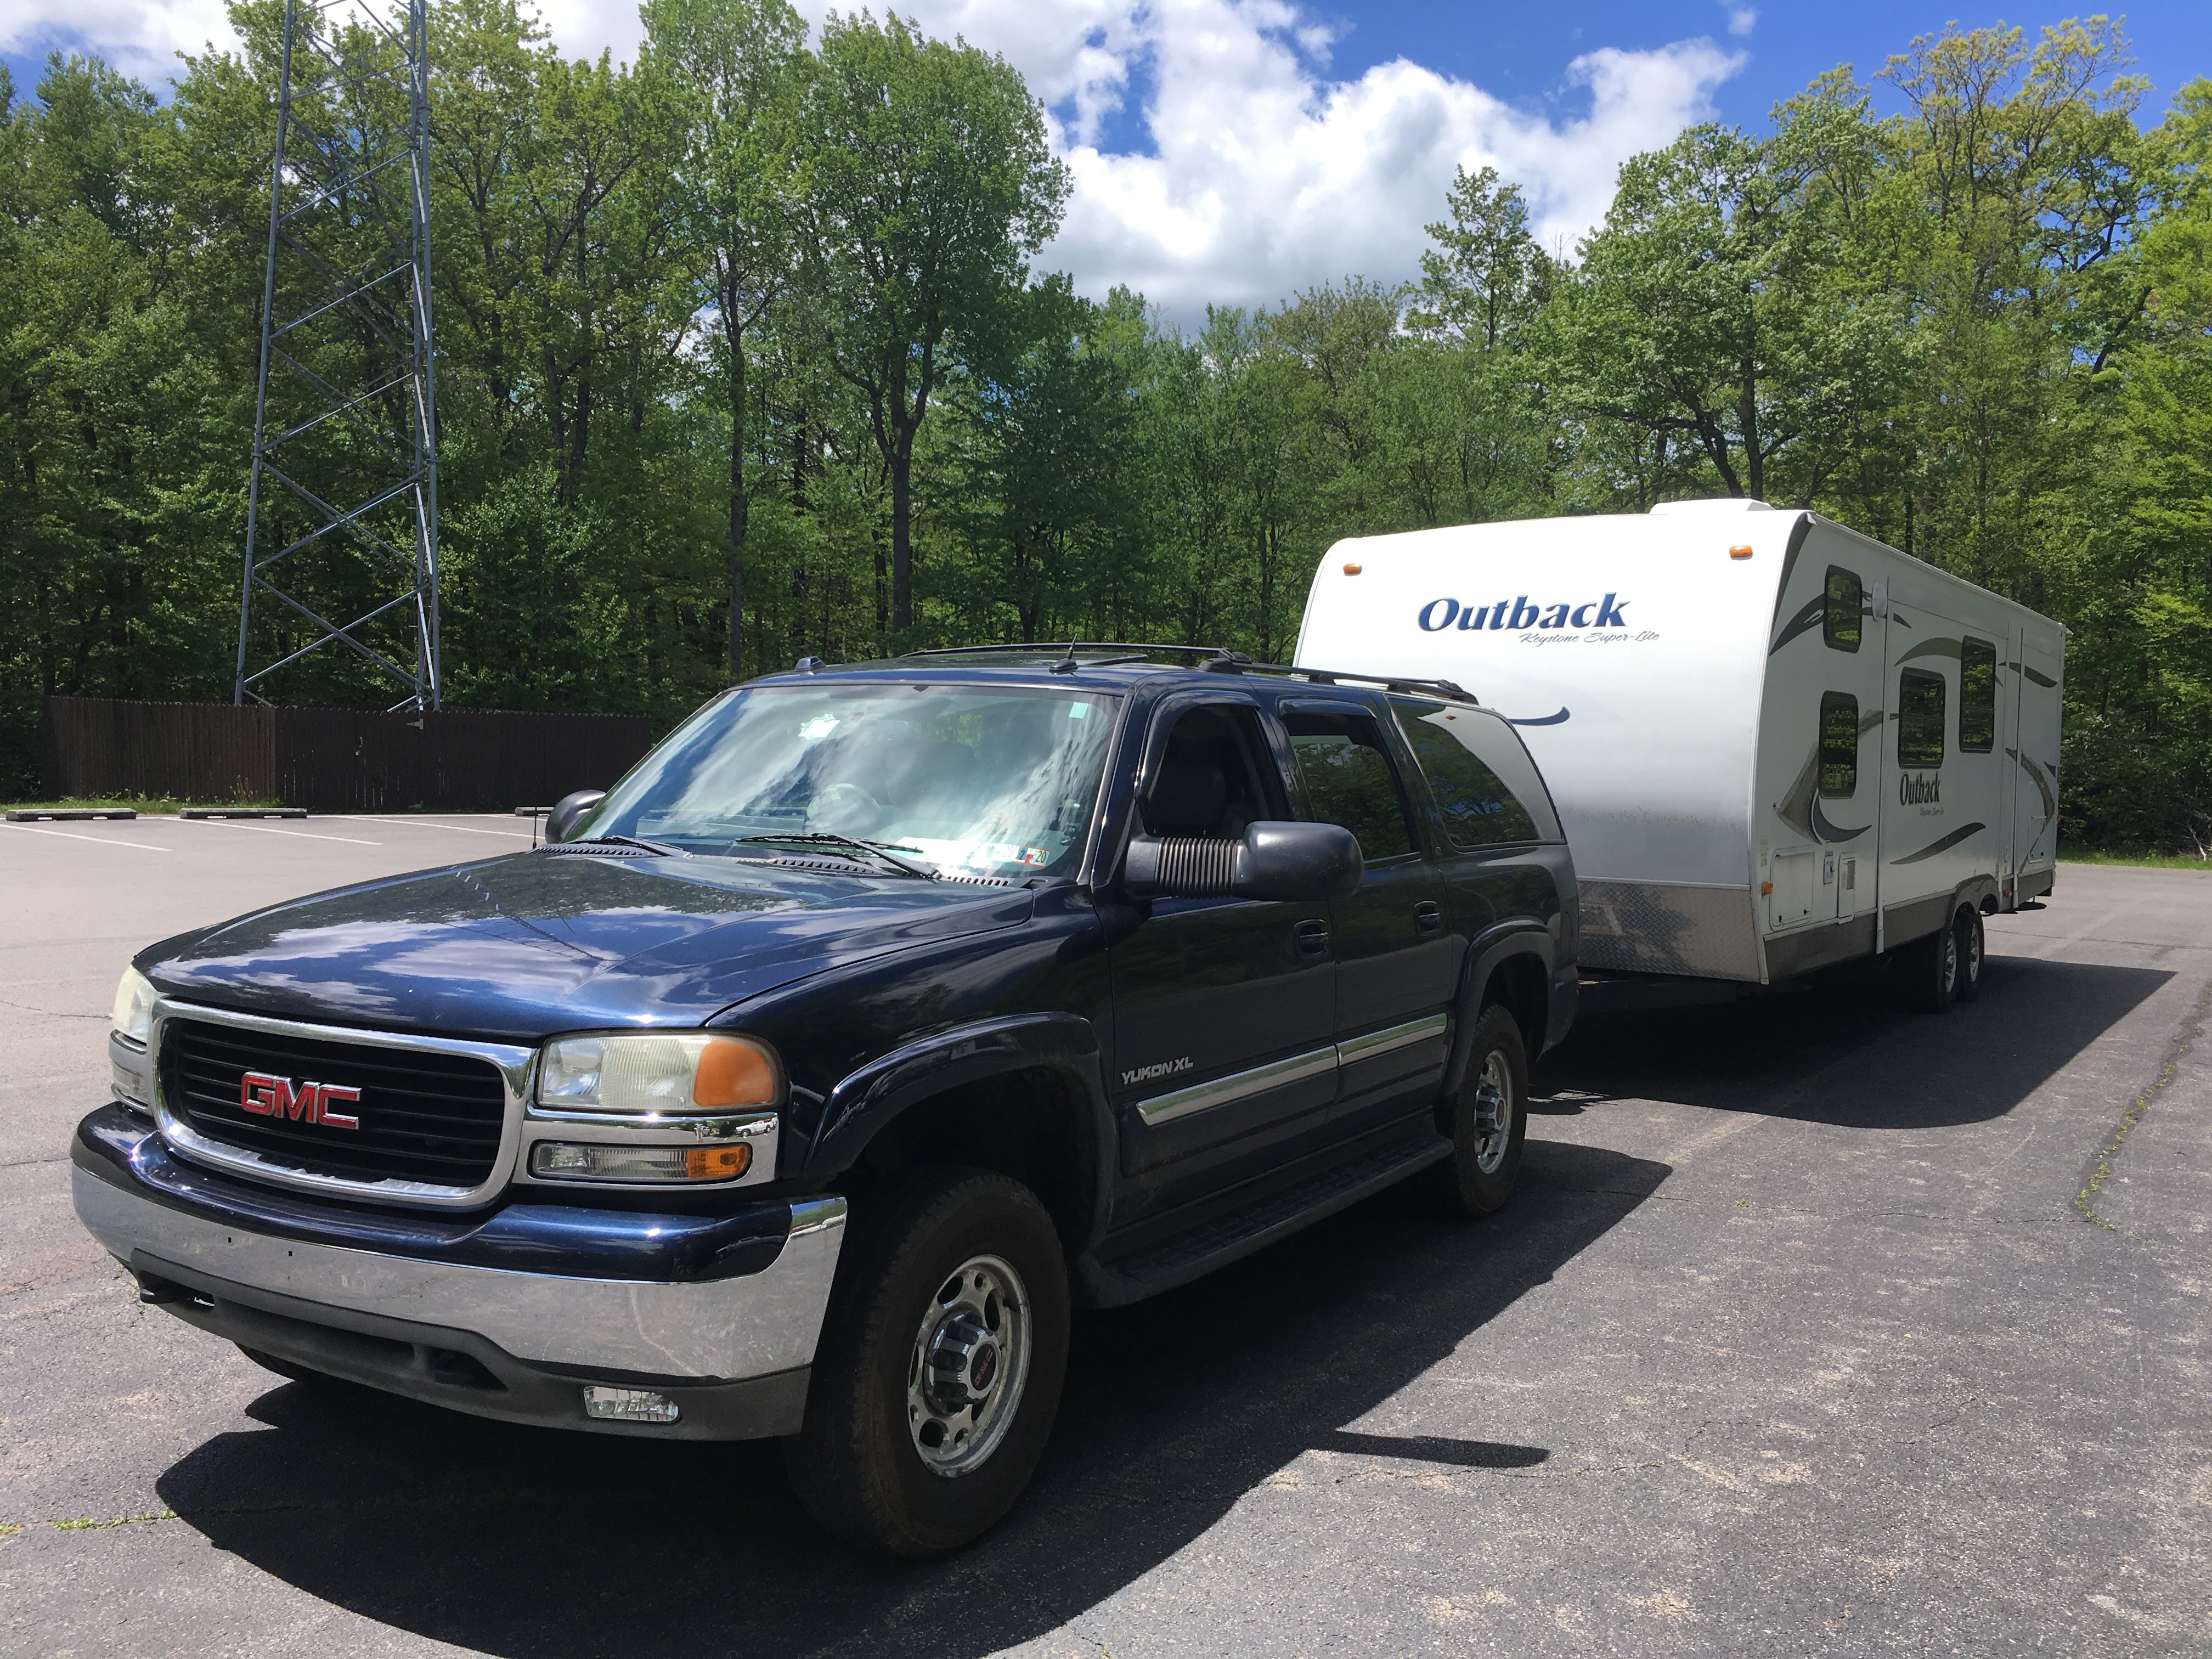 Shakedown RV Trip: Learning Experiences